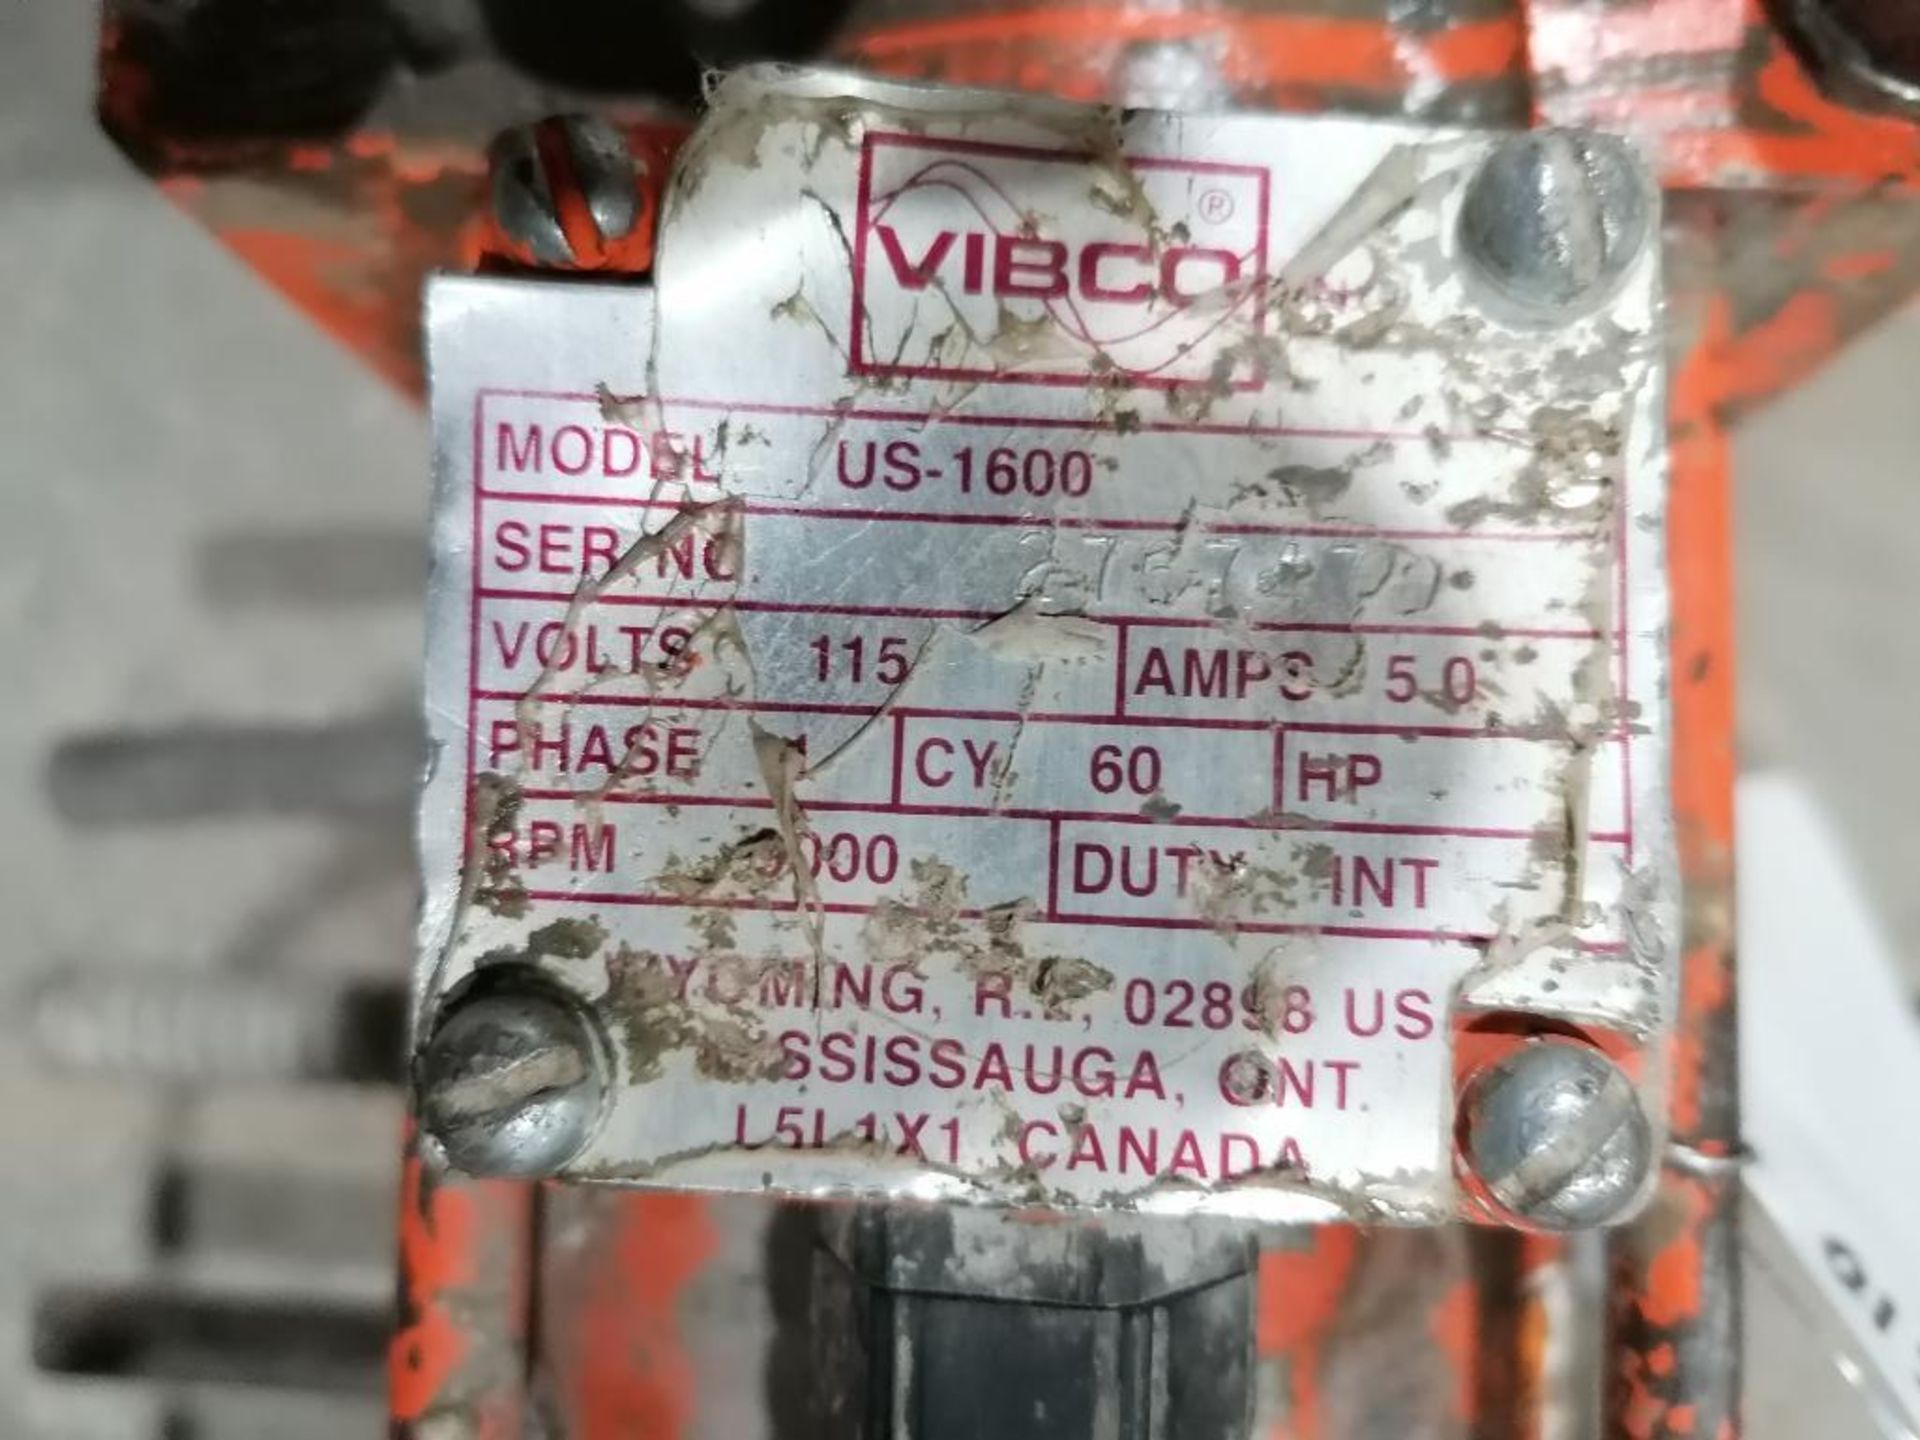 (1) VIBCO US-1600 High Frequency Electric Vibrator, Serial #276747. Located in Council Bluffs, IA. - Image 7 of 8